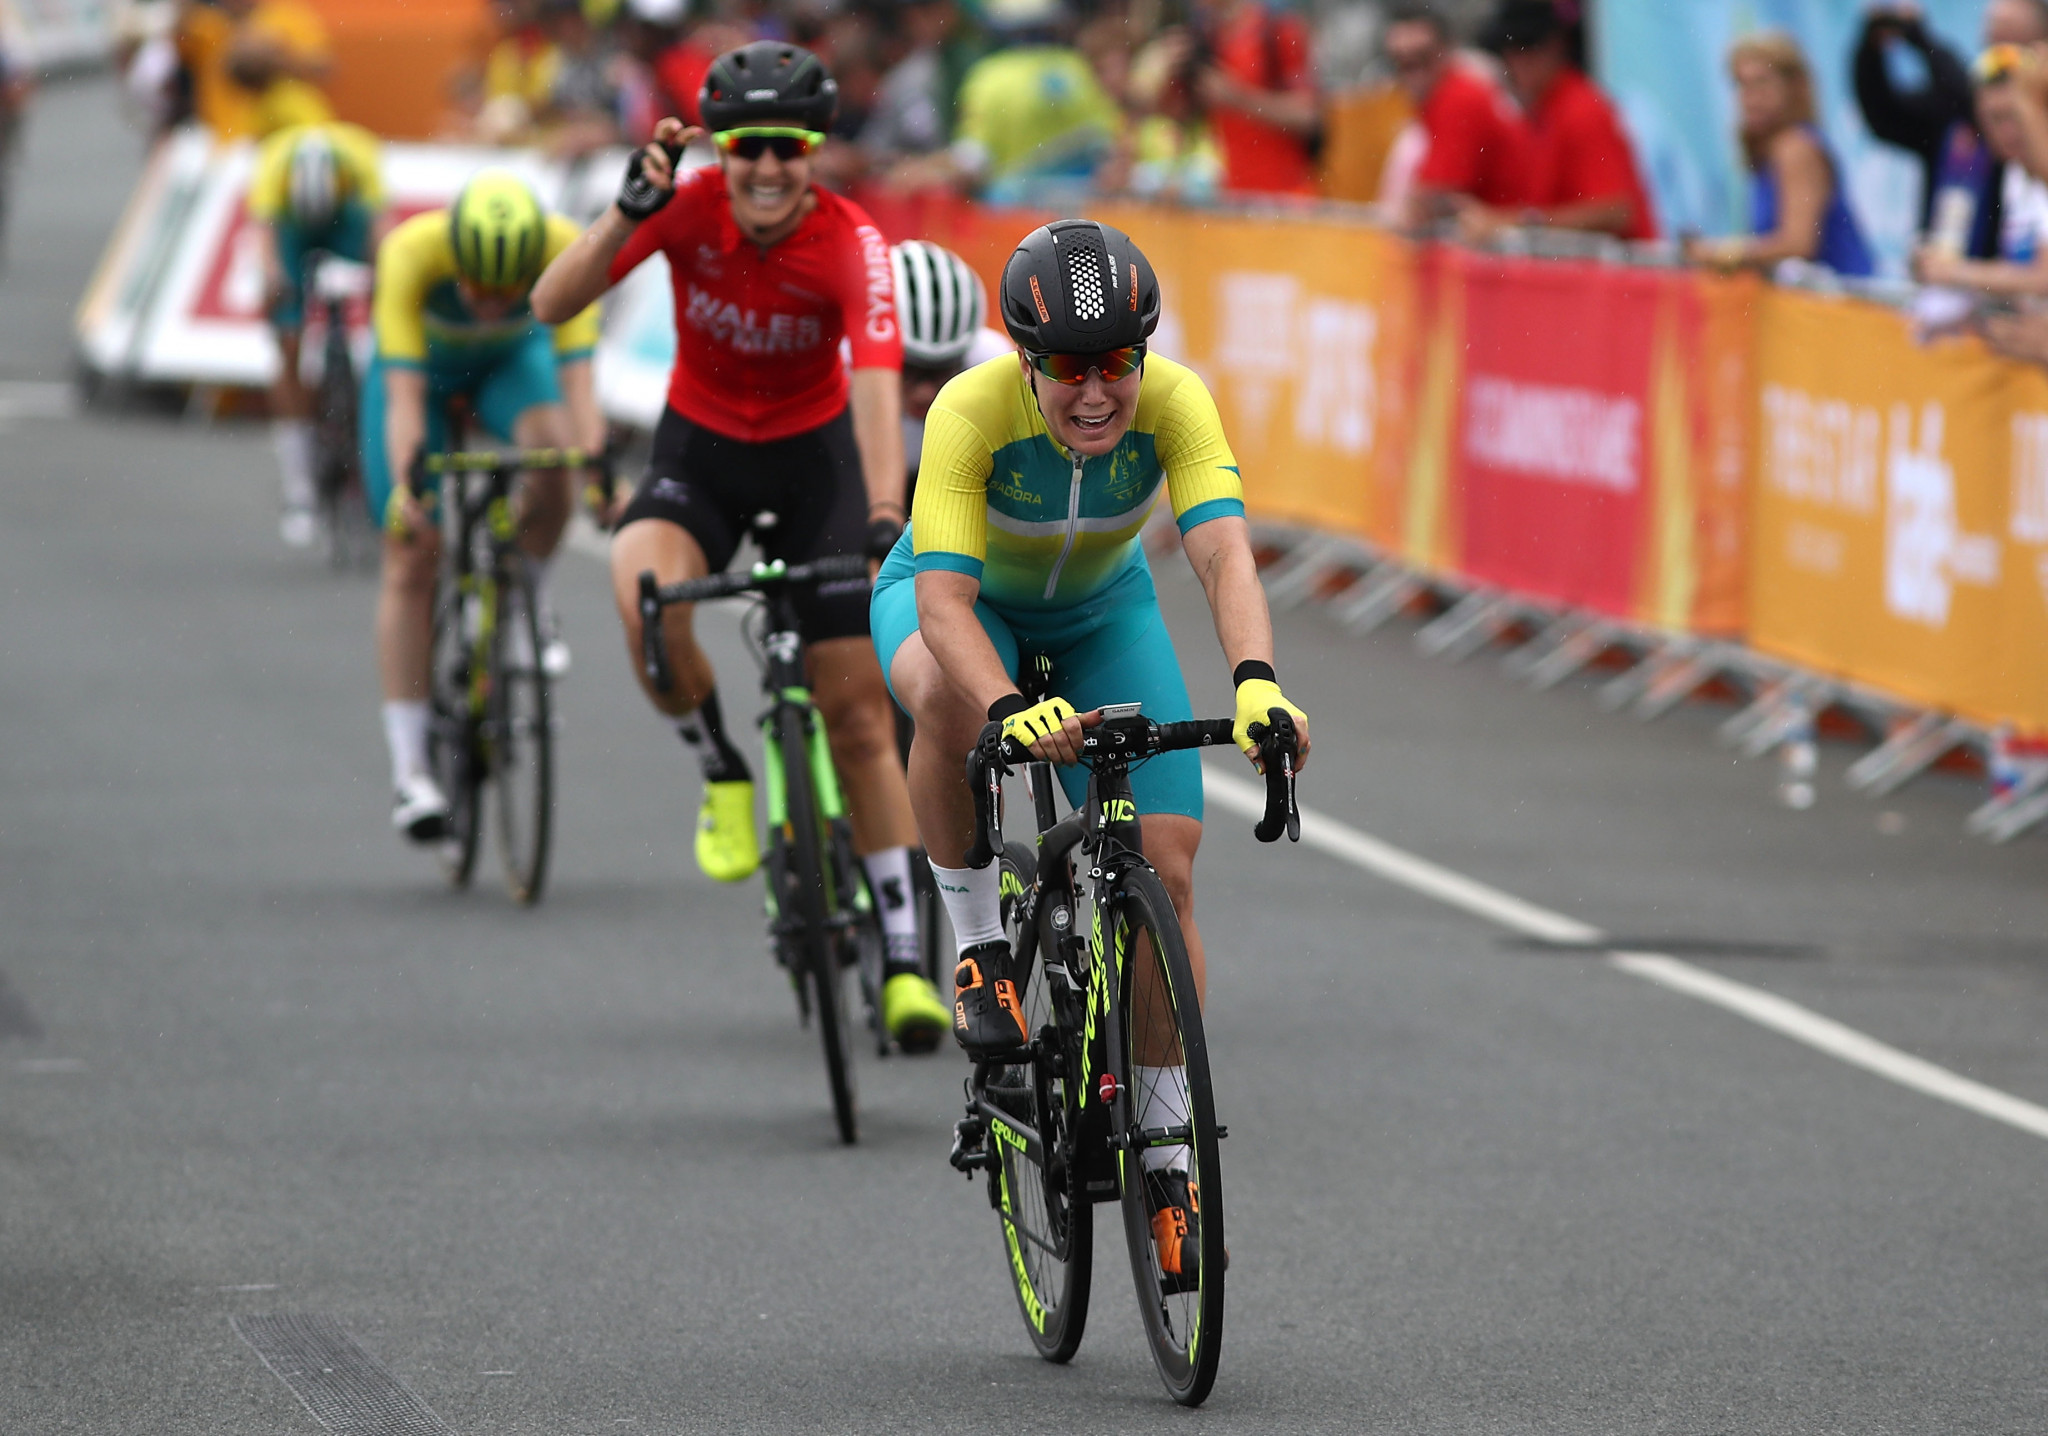 Australia's Chloe Hosking lived up to her tag as favourite by sprinting to victory in the women’s road cycling race ©Getty Images